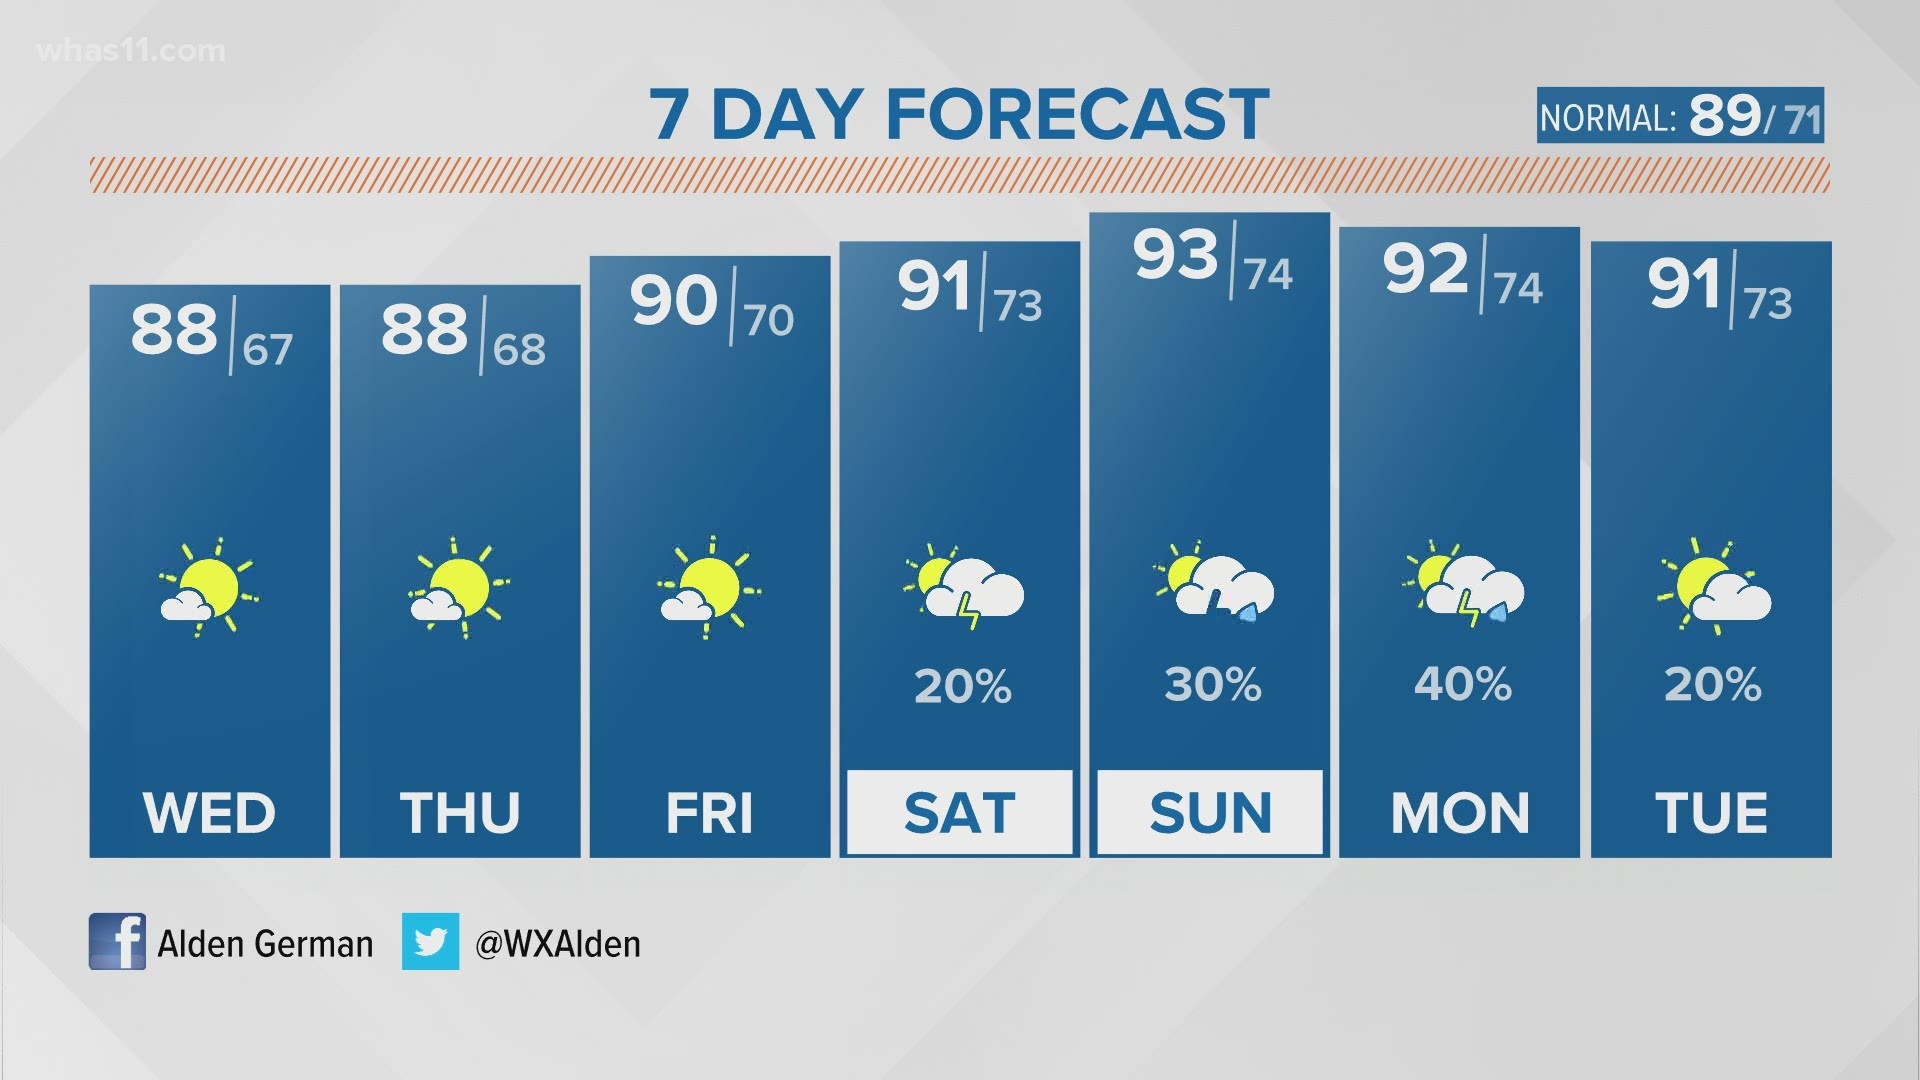 The forecast remains dry until late weekend, but signs of high heat next week.